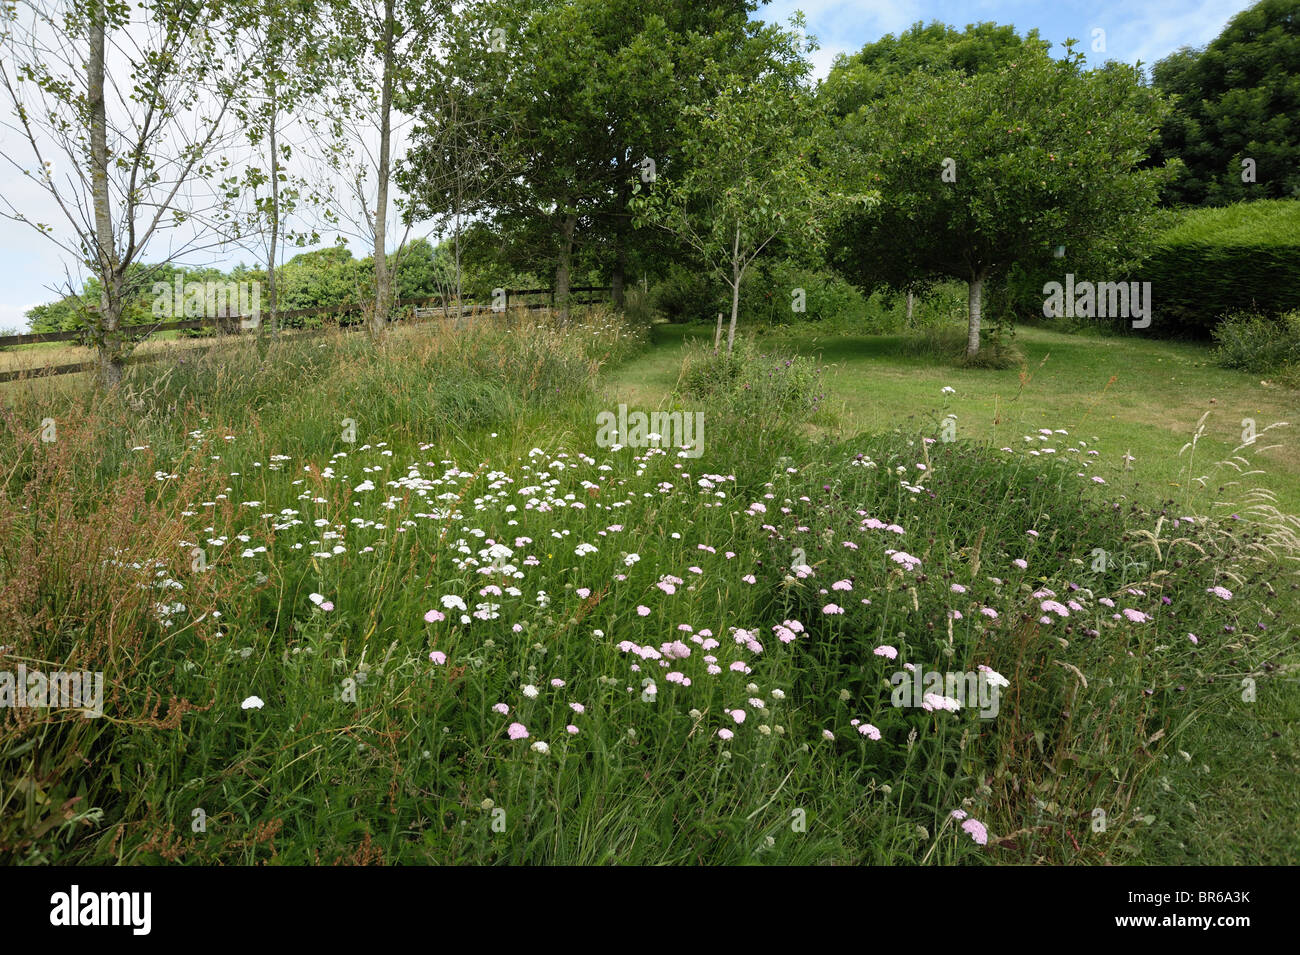 Natural meadow garden with fruit trees and pathways cut for access Stock Photo